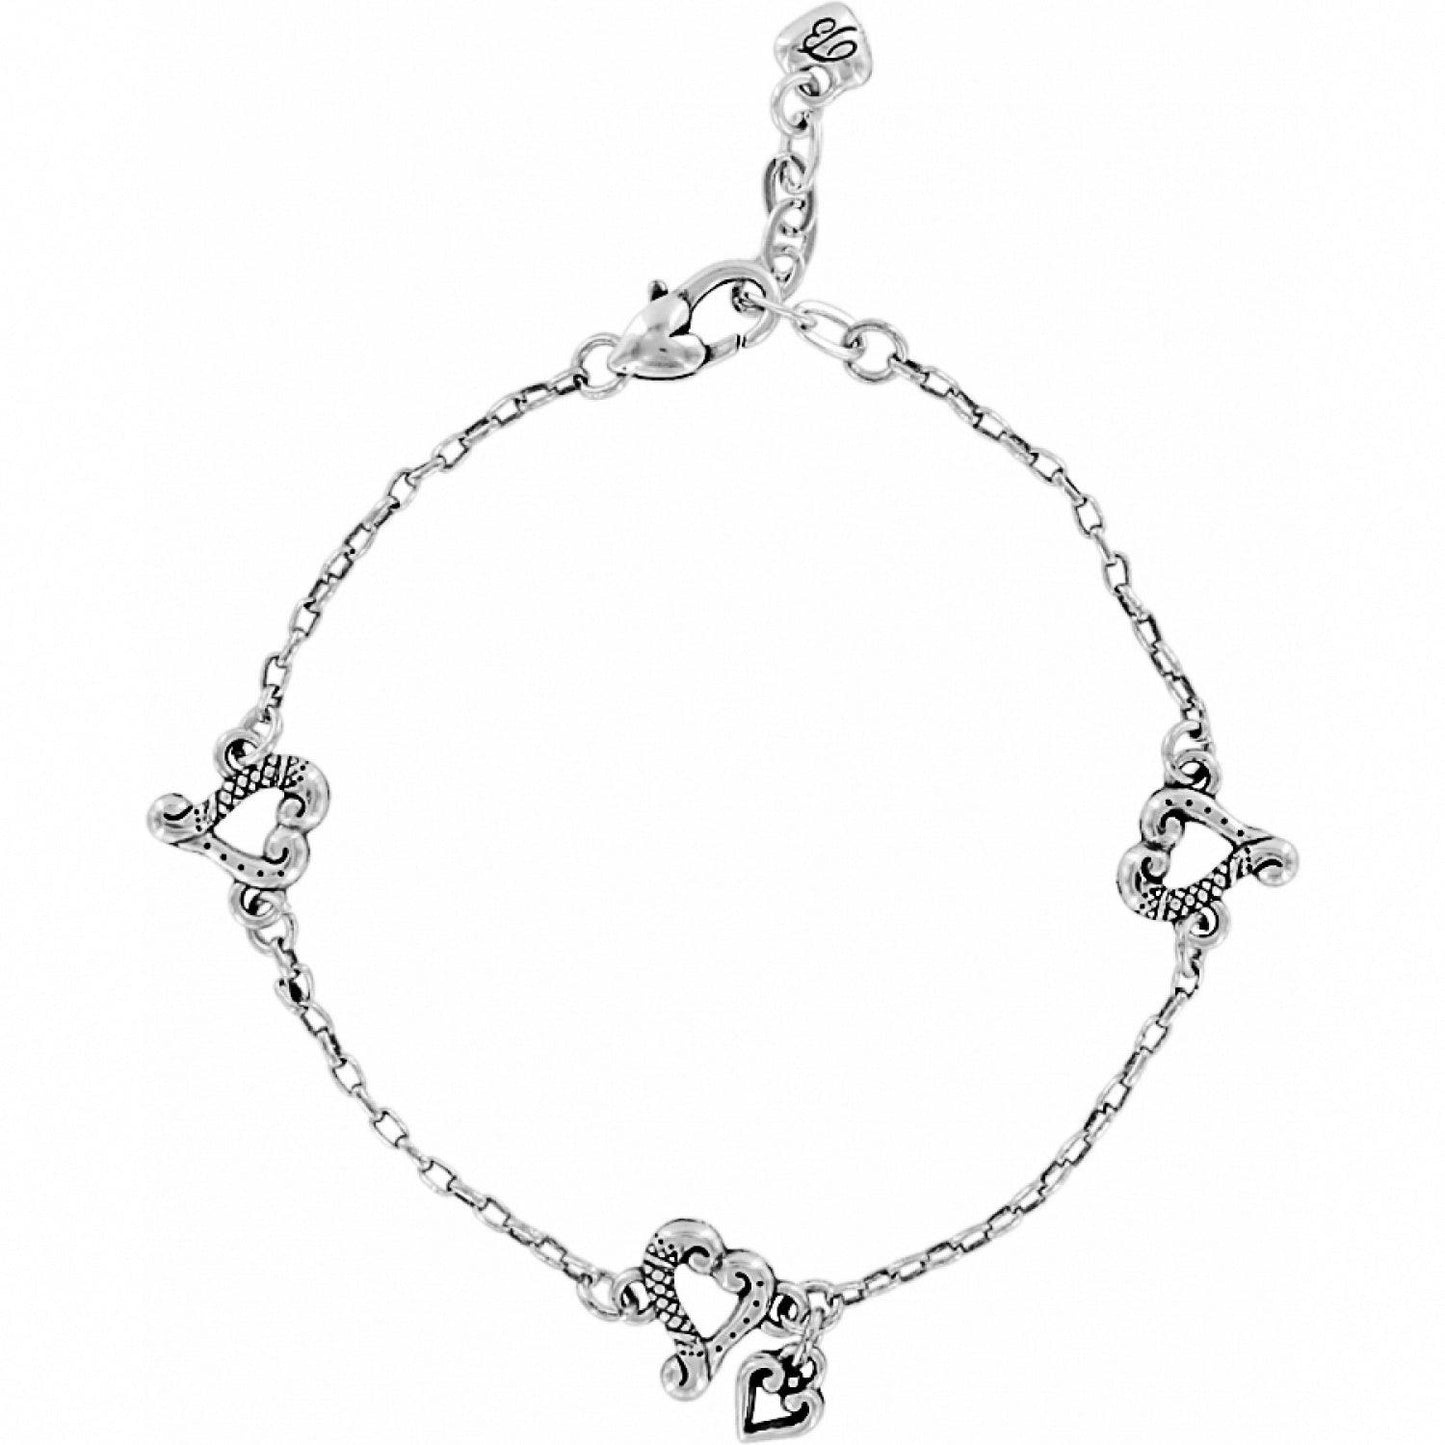 Tuscan Heart Anklet - The Silver Dahlia